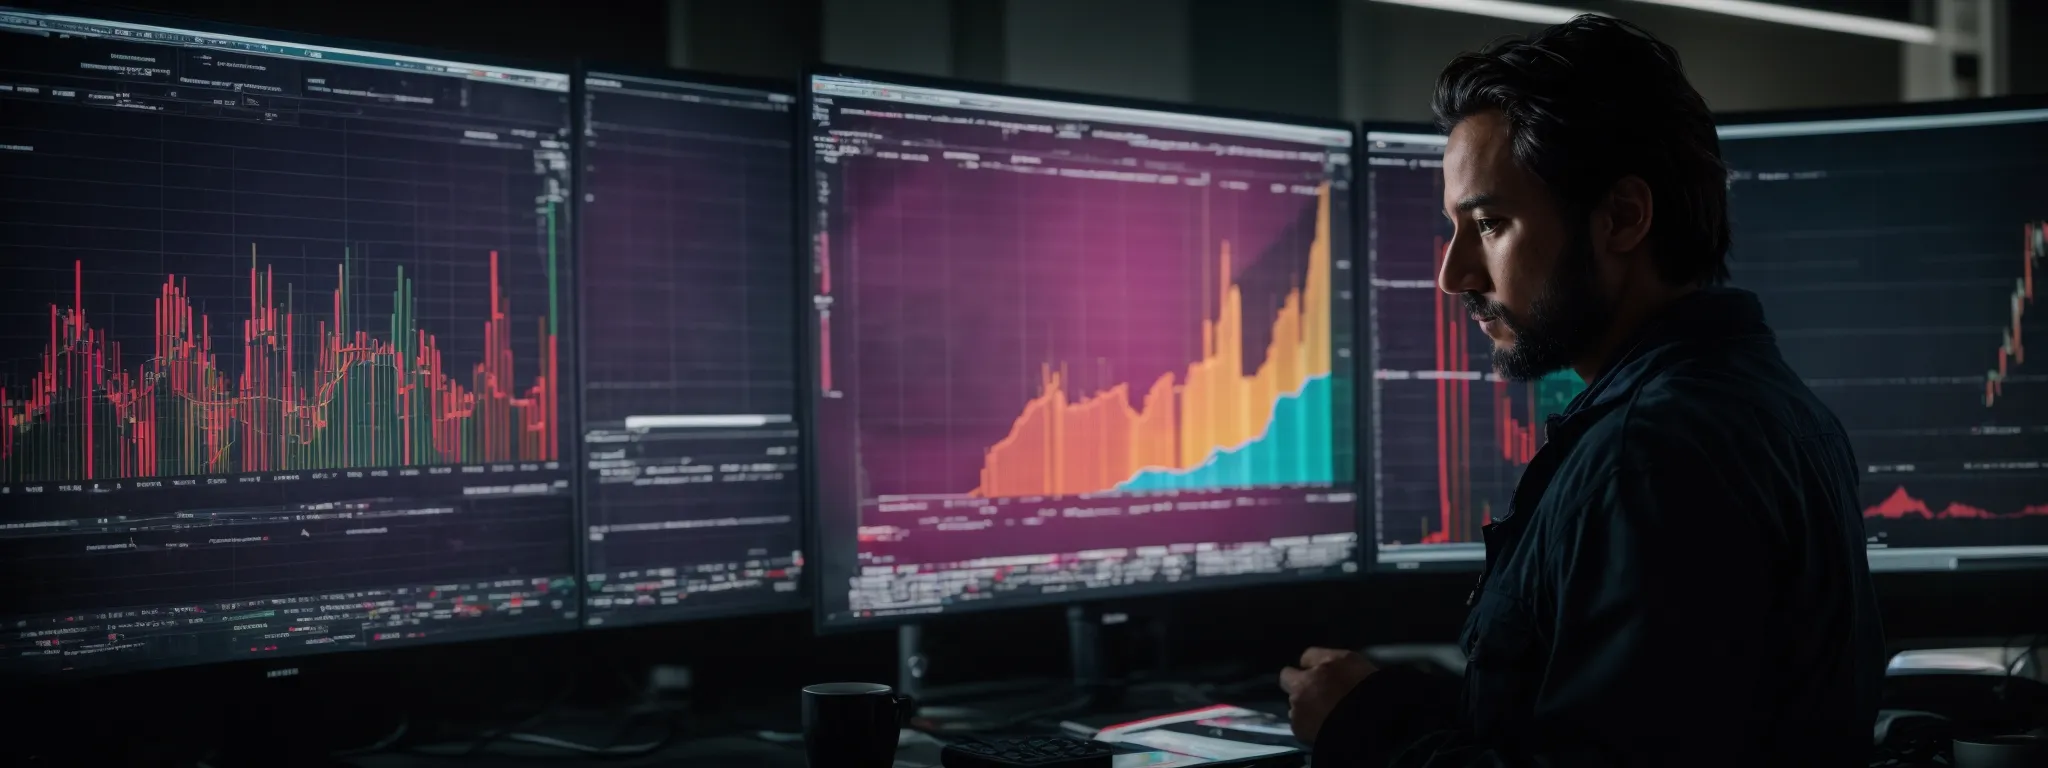 a focused individual scrutinizes analytics on a large monitor displaying colorful charts and graphs of website data.